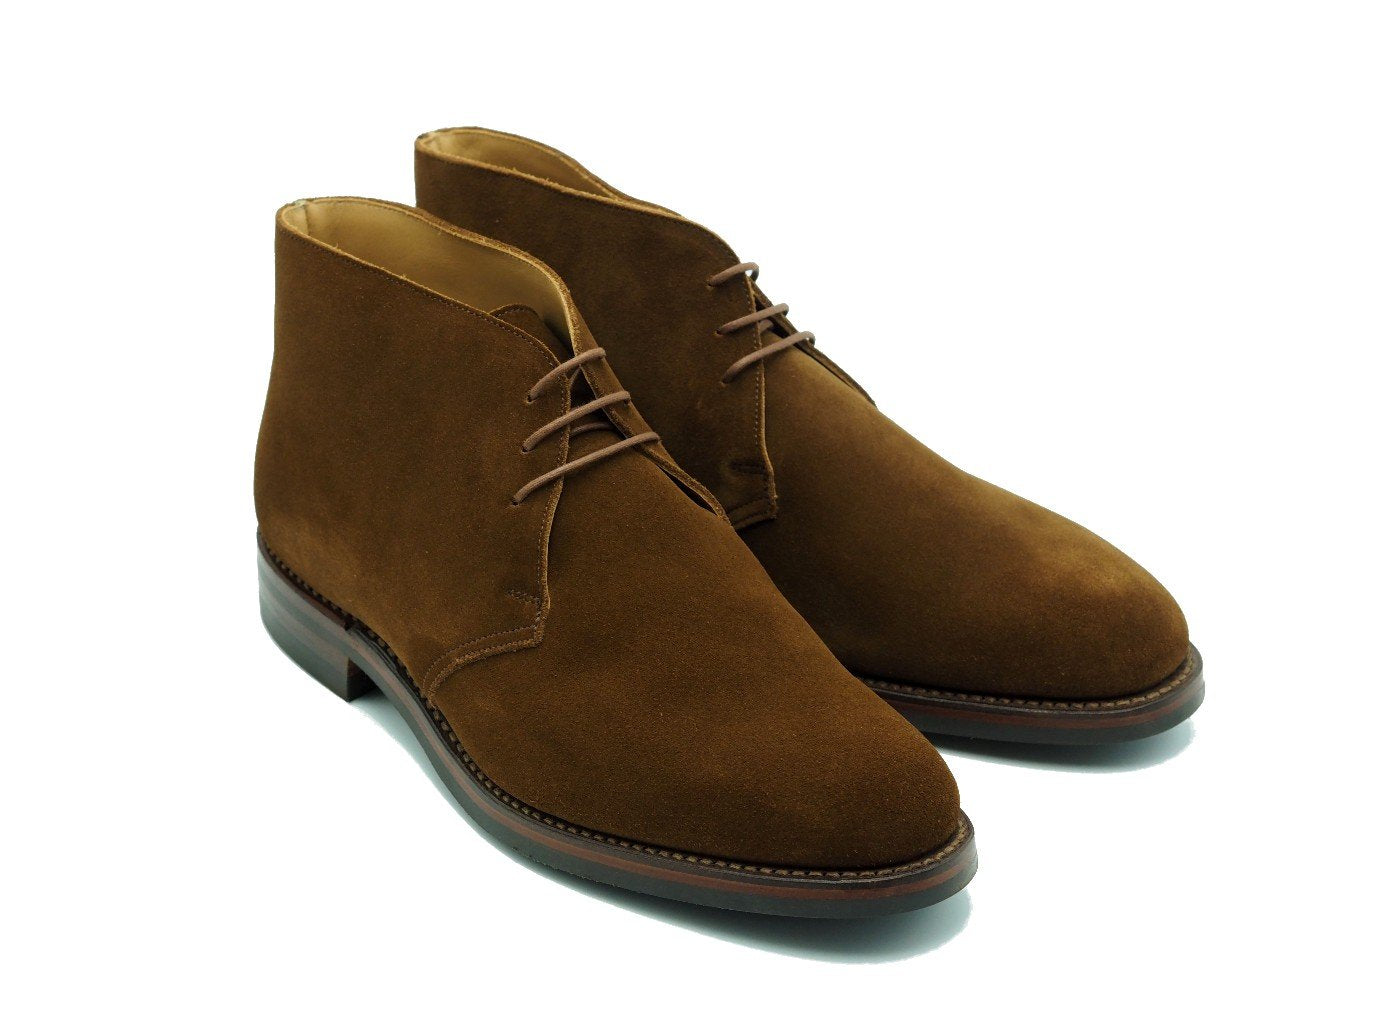 Front angle view of Crockett & Jones Chiltern chukka boots in snuff suede